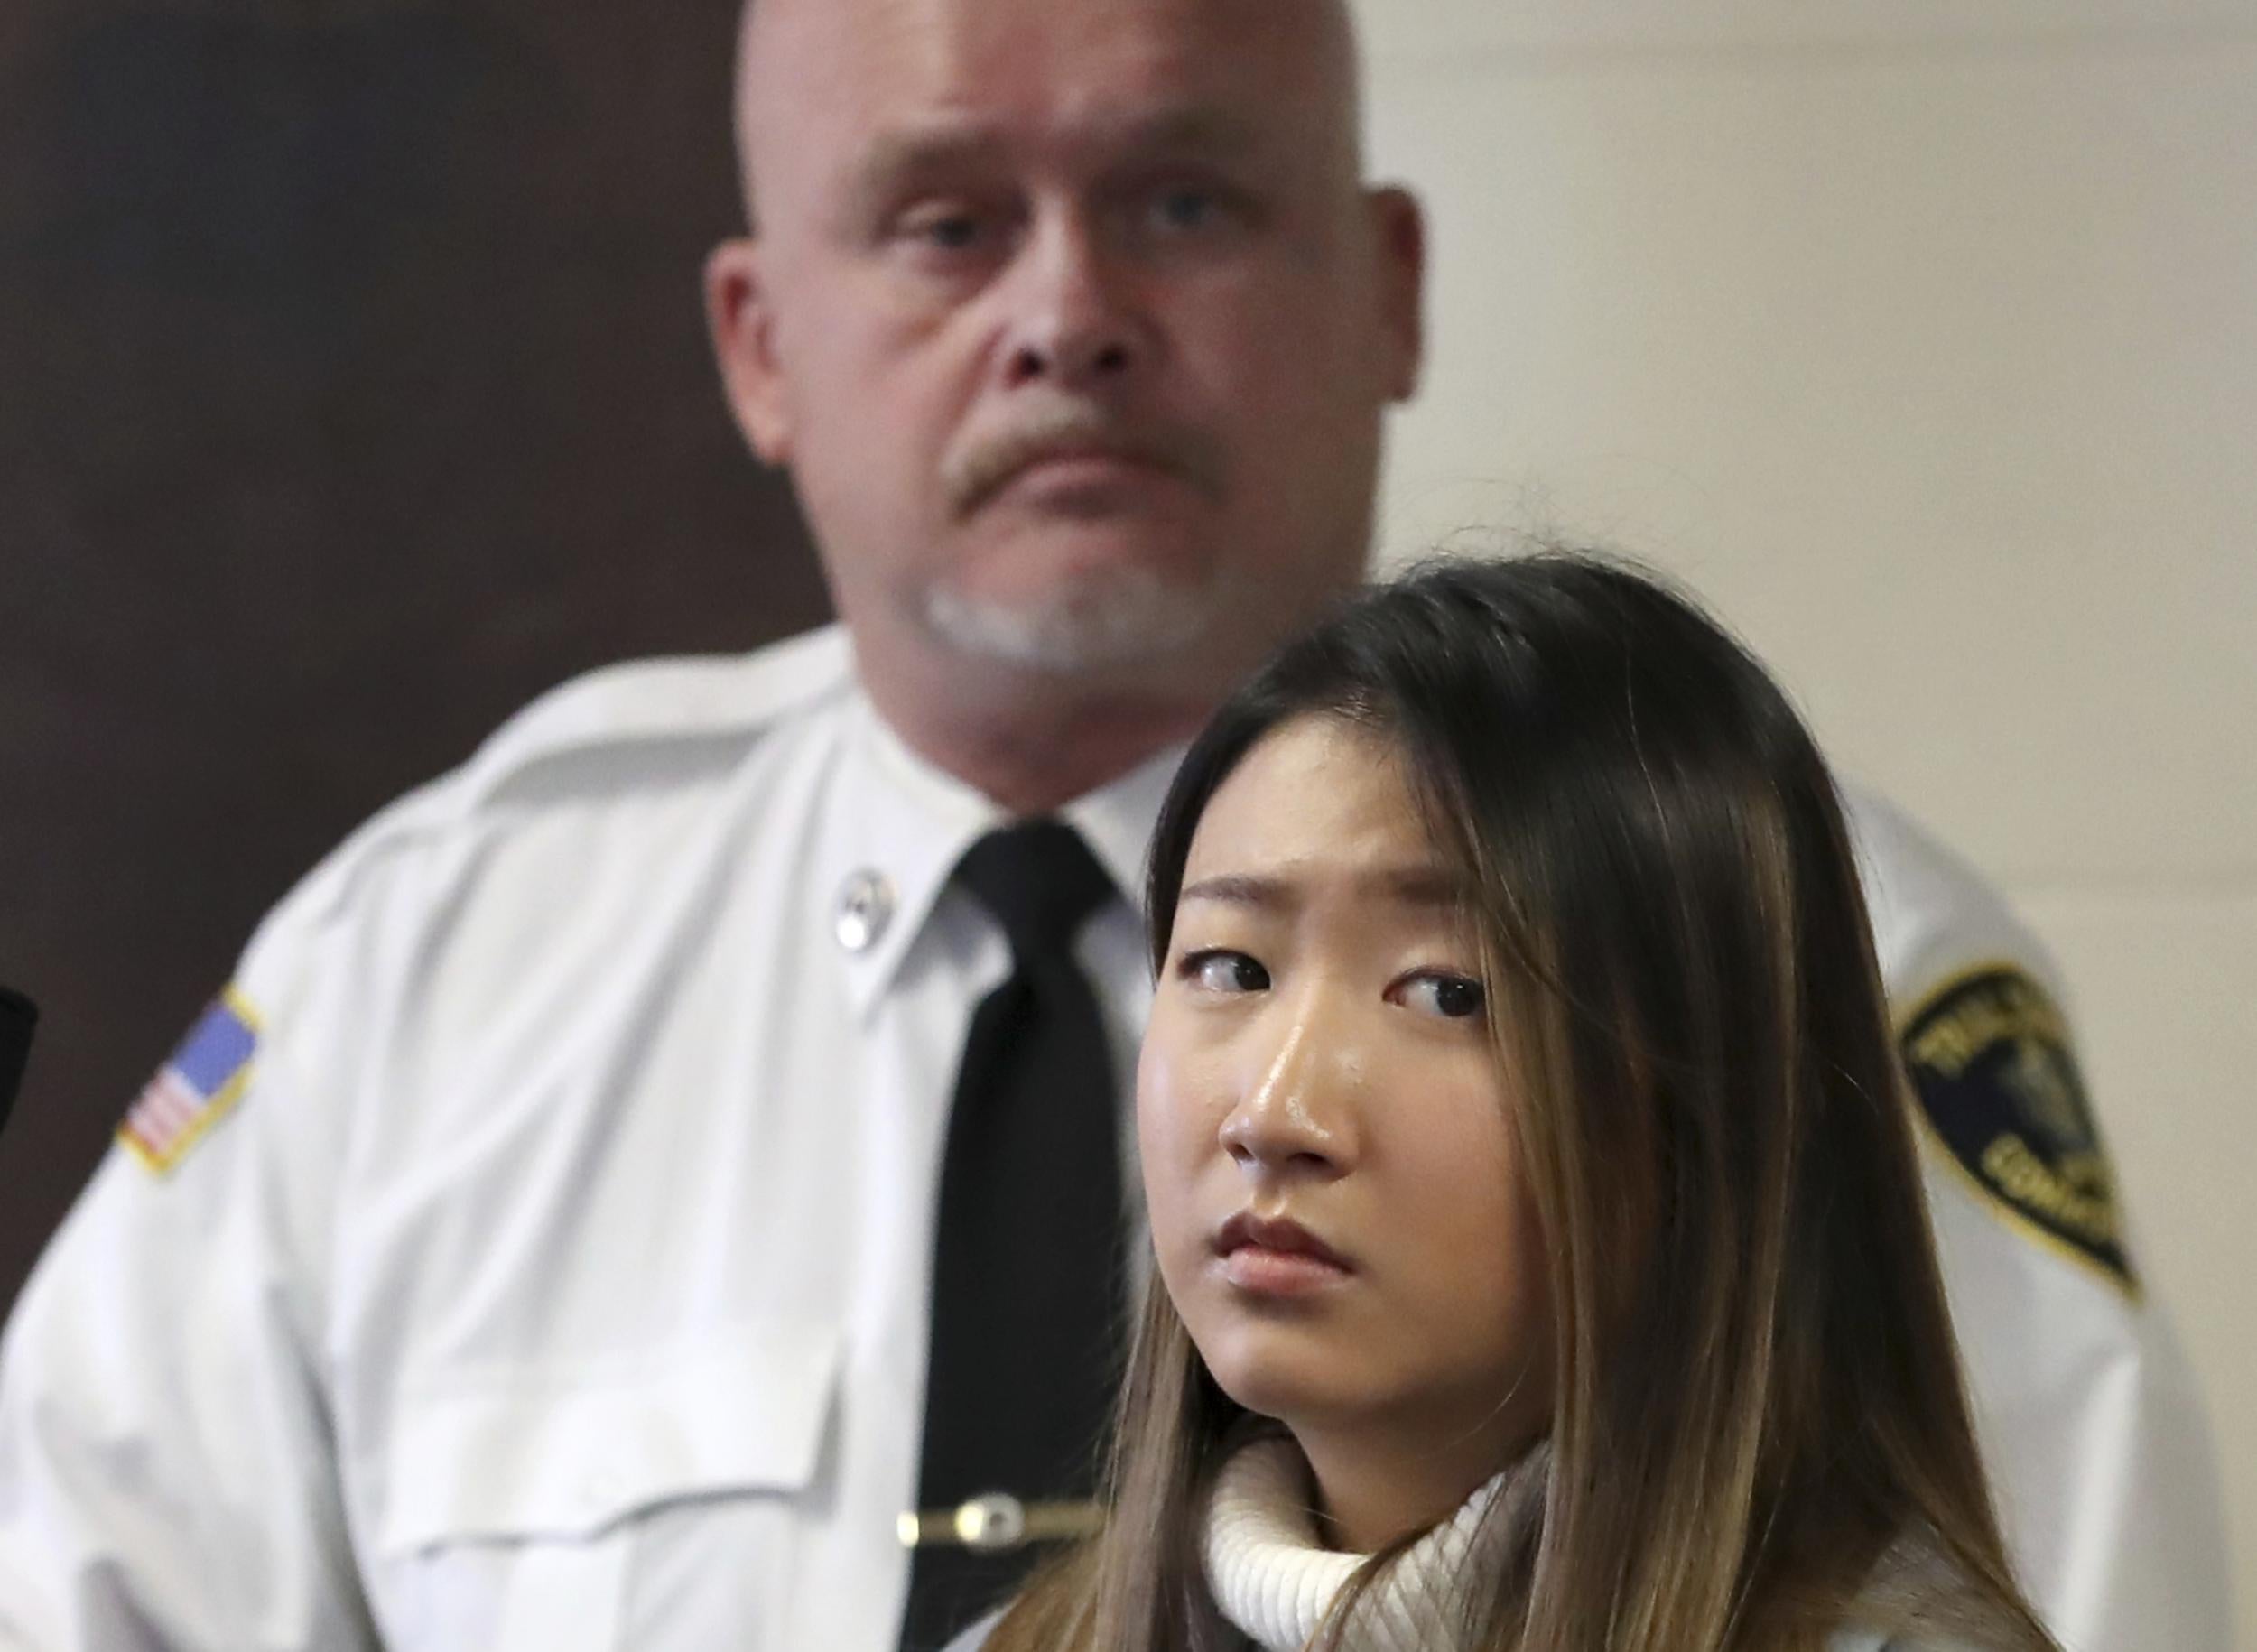 Inyoung You, 21, appears in Suffolk Superior Court in Boston as the former Boston College student pleaded not guilty to involuntary manslaughter in a case accusing her of encouraging her boyfriend Alexander Urtula to take his life.